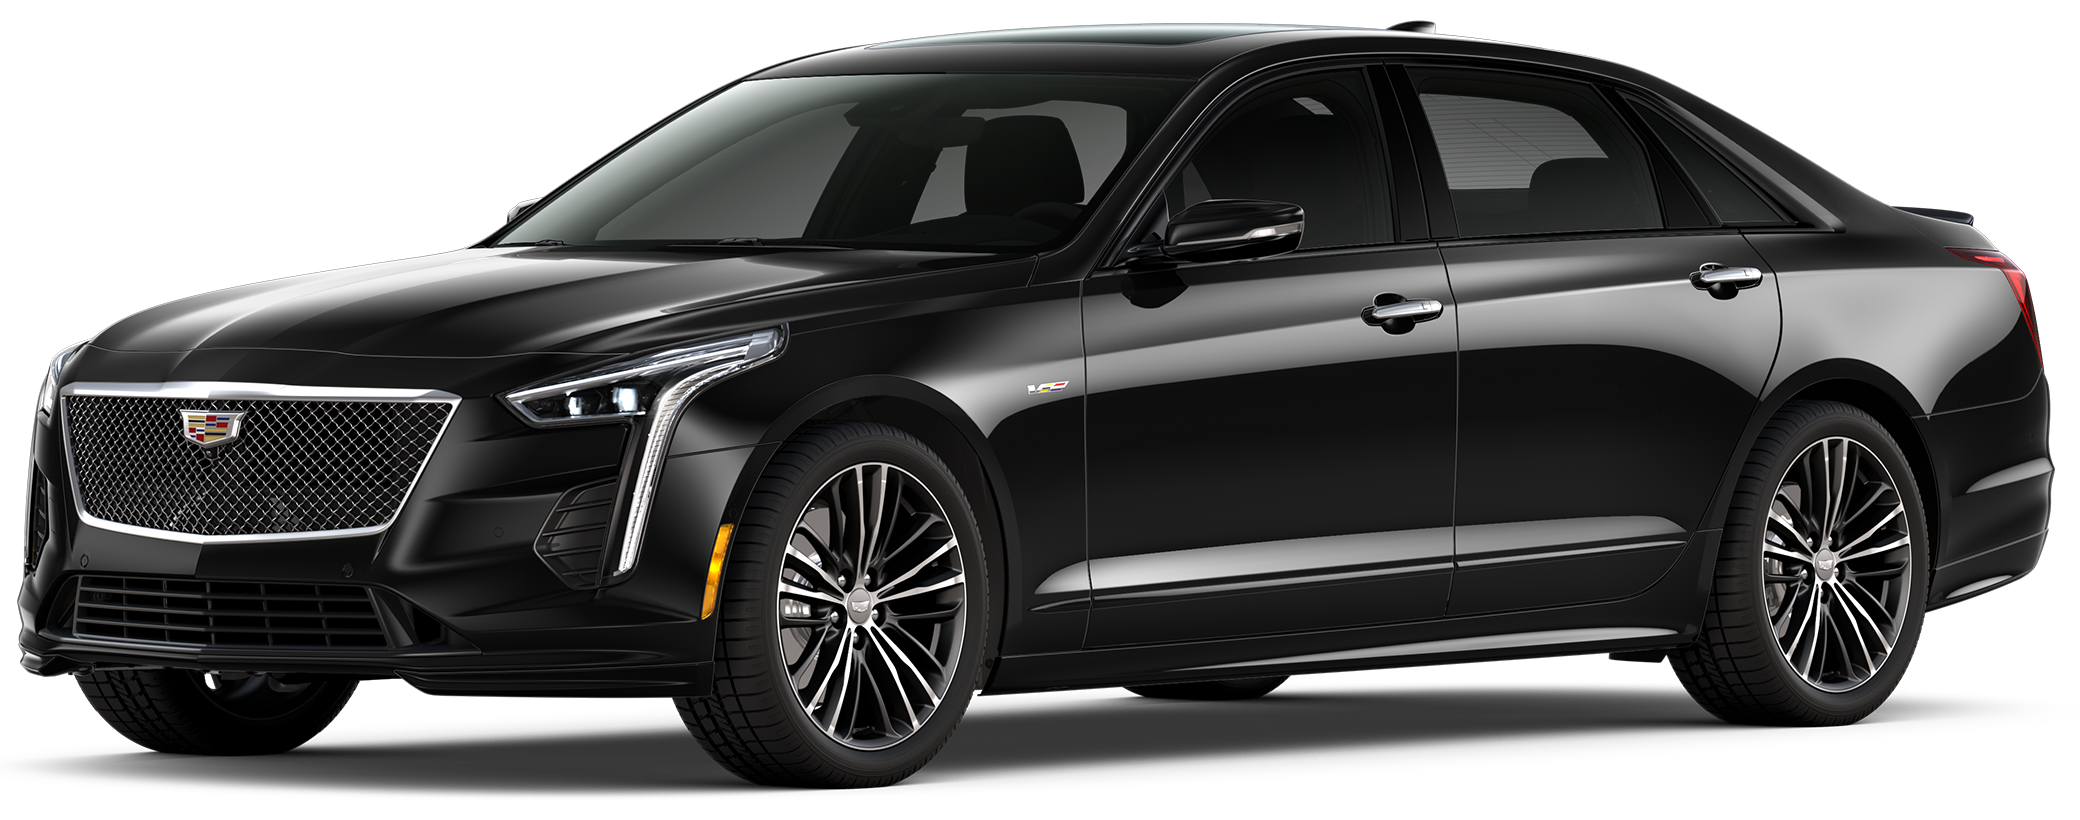 2020-cadillac-ct6-v-incentives-specials-offers-in-wilkes-barre-pa